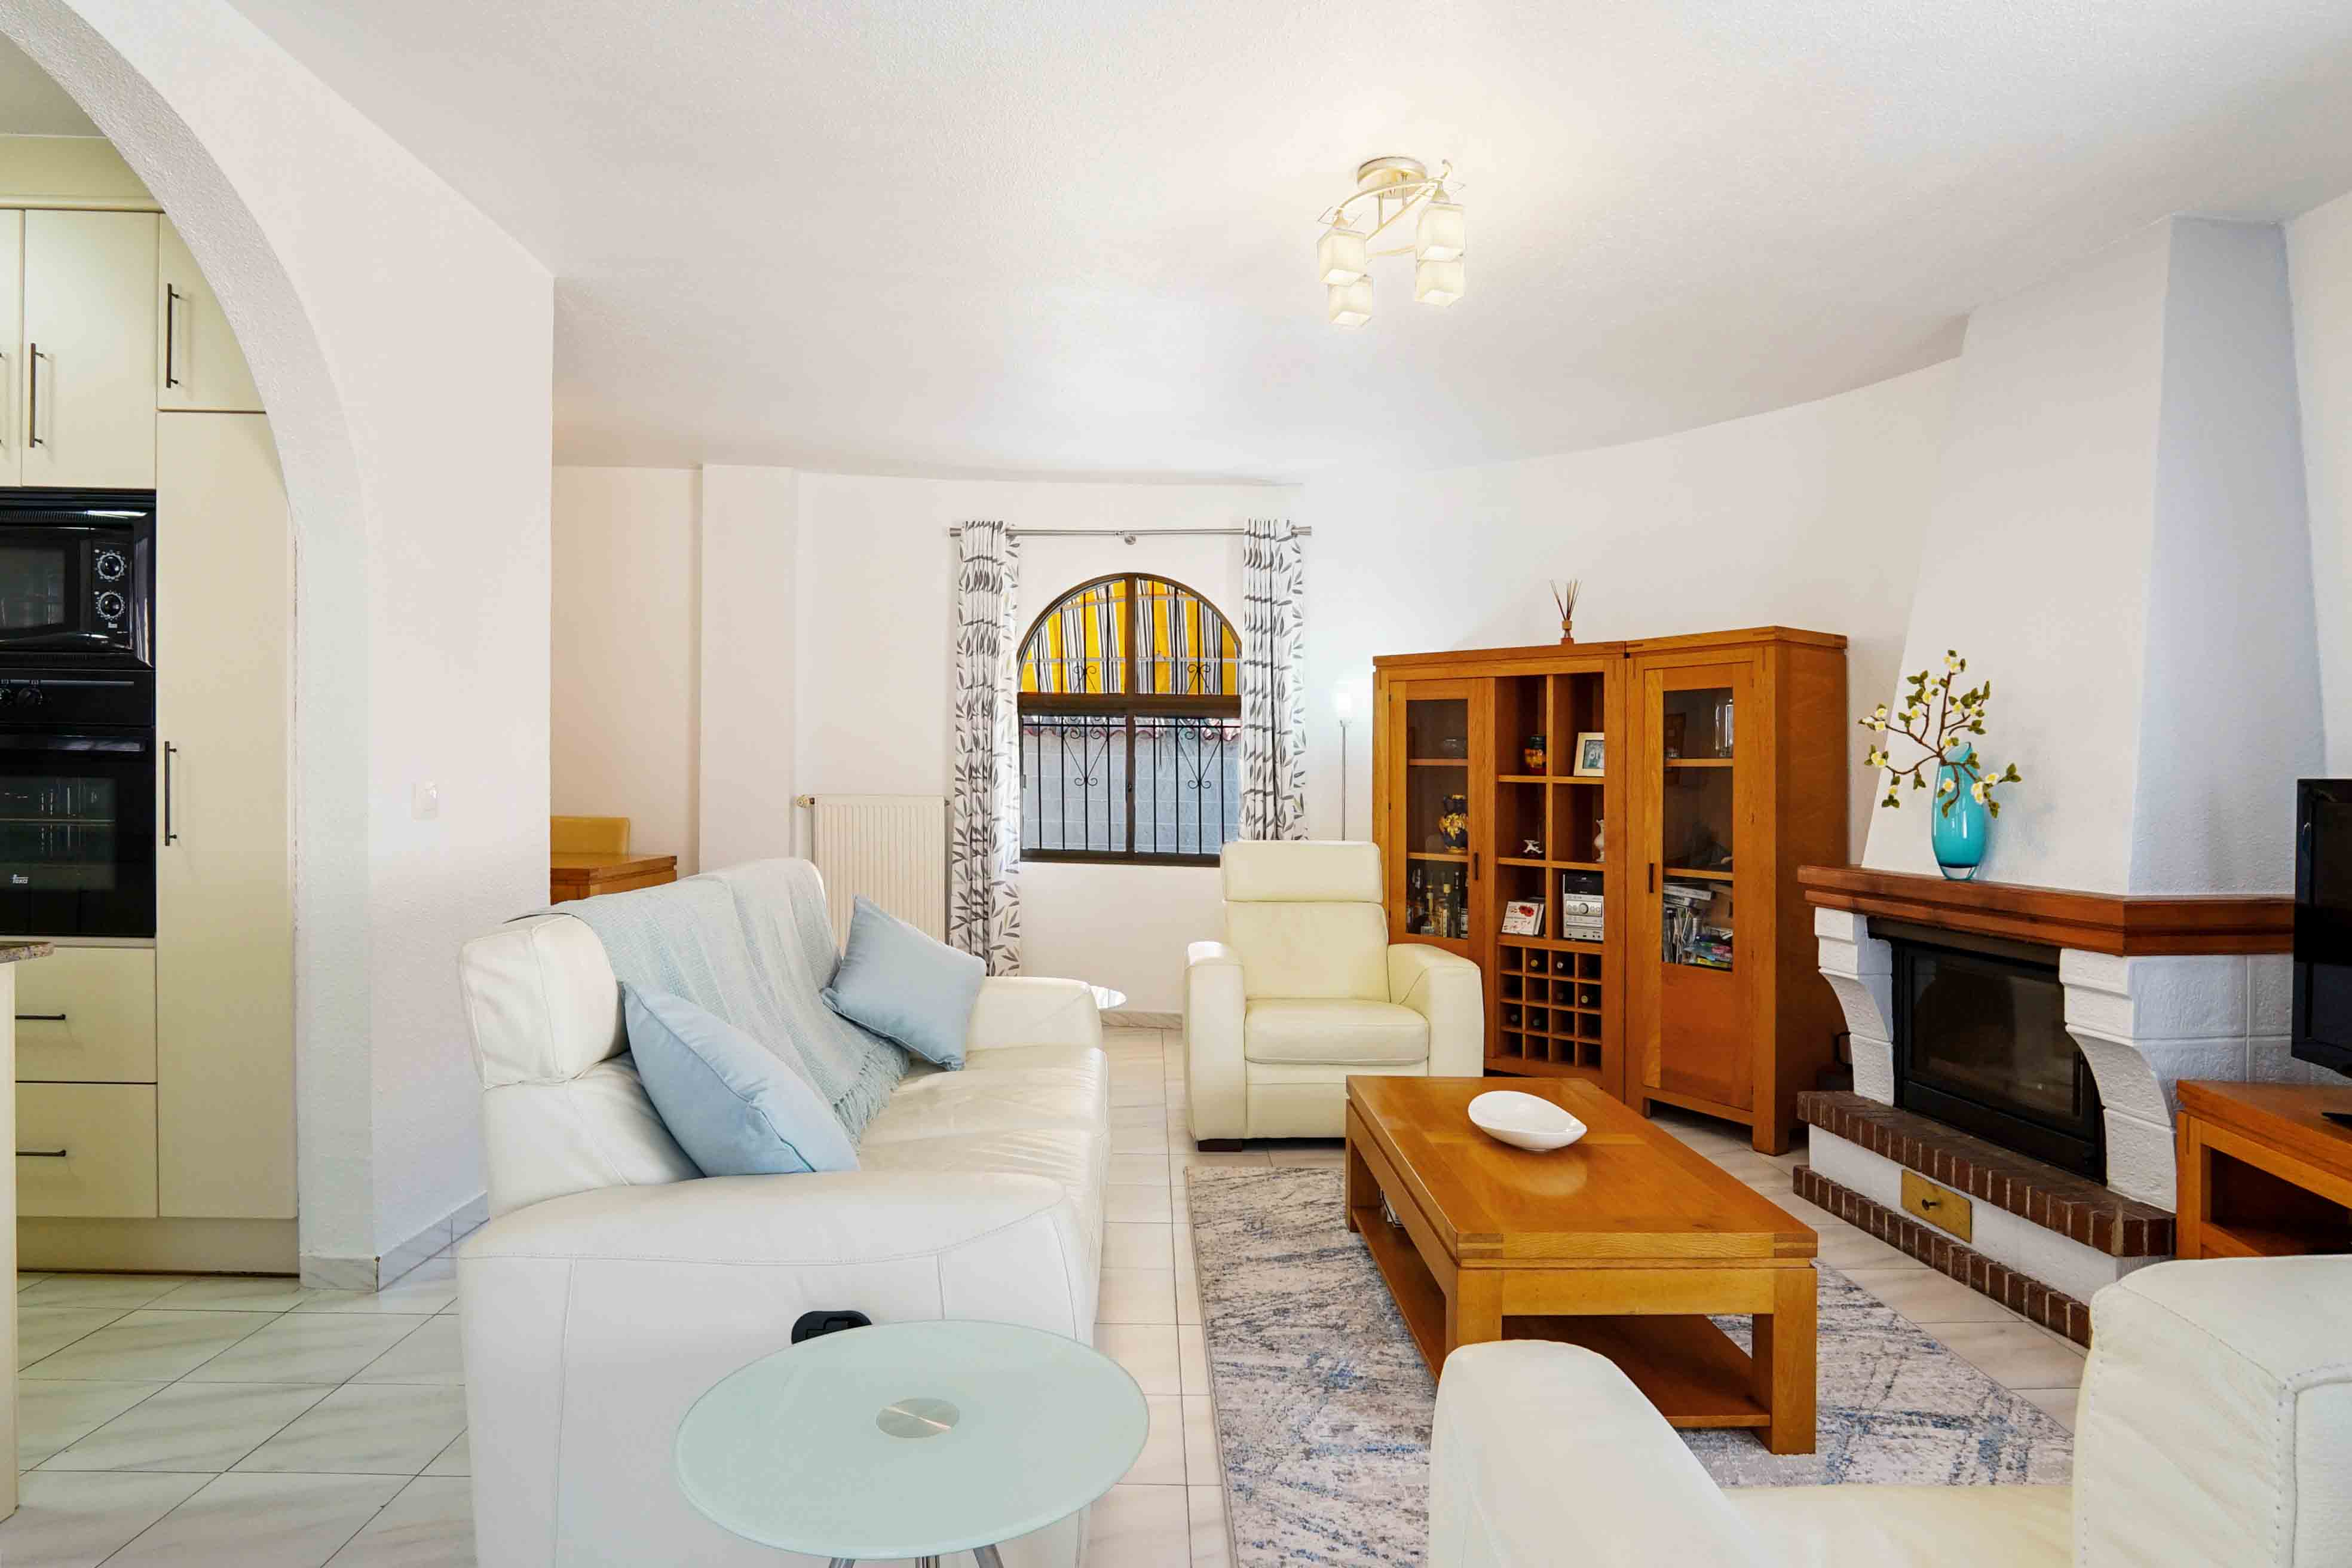 3405-03689.  Villa with 3 large bedrooms, 2 bathrooms and a private pool